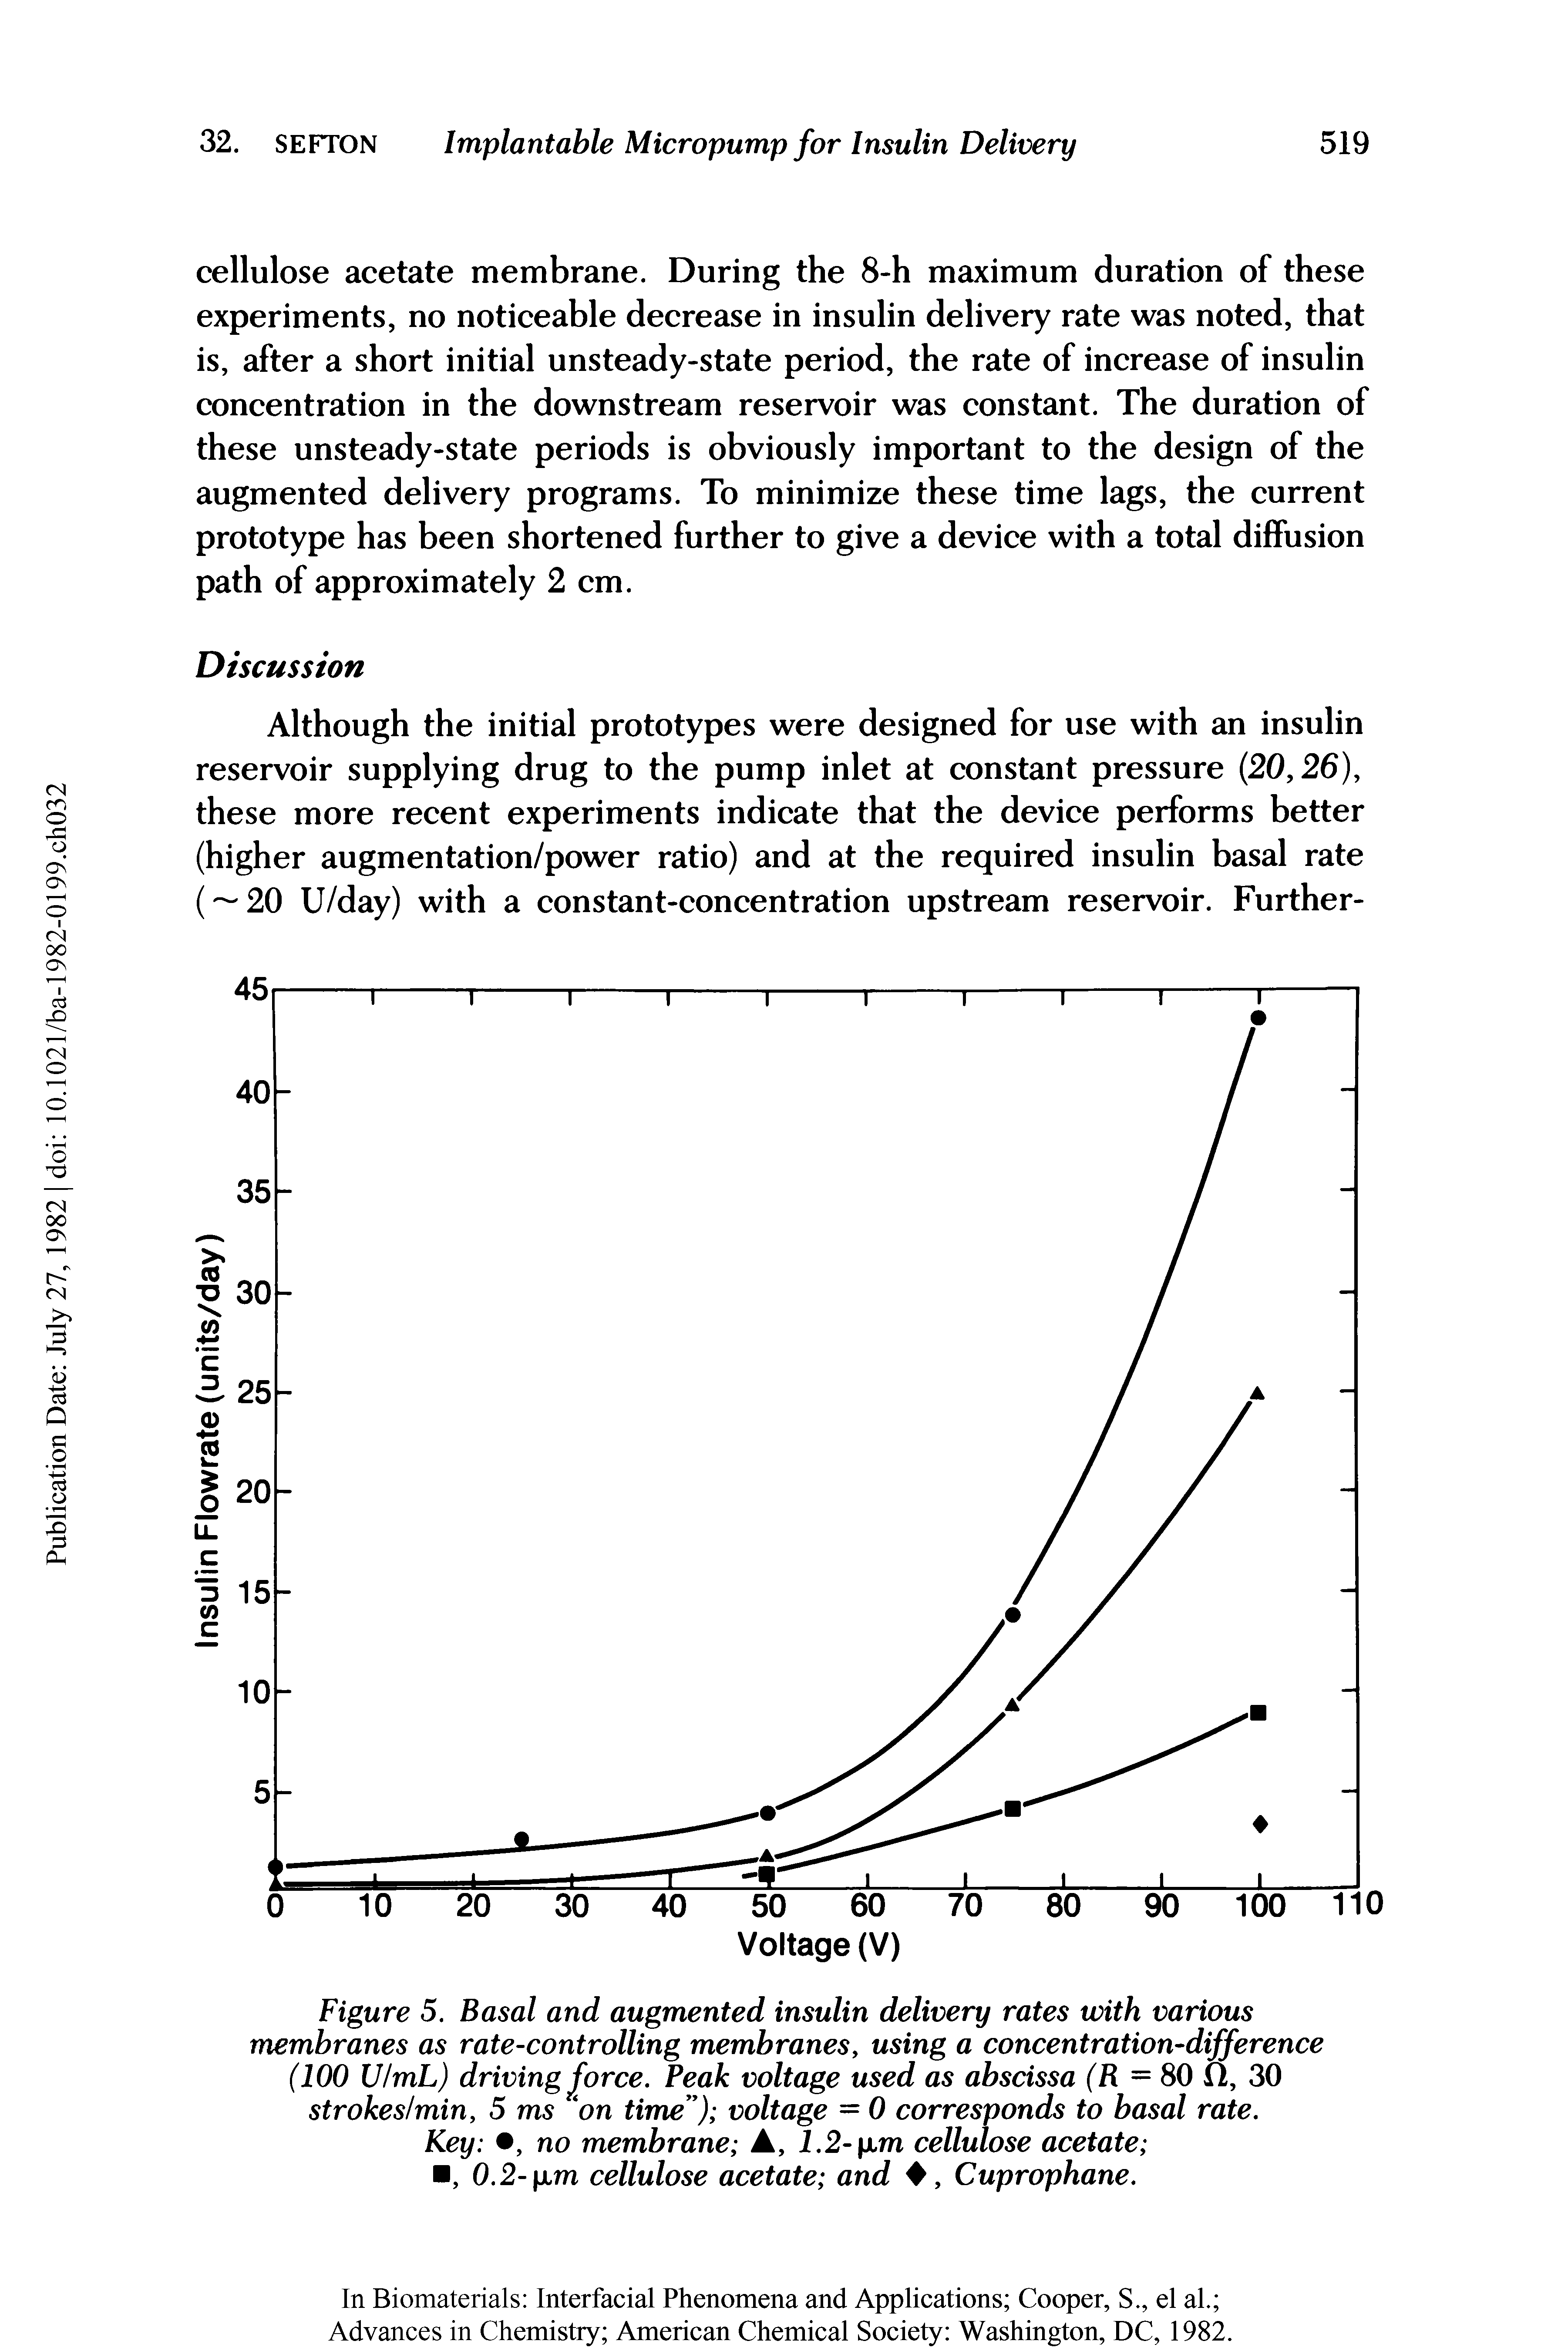 Figure 5. Basal and augmented insulin delivery rates with various membranes as rate-controlling membranes, using a concentration-difference (100 U/mL) driving force. Peak voltage used as abscissa (R = 80 ft, 30 strokes min, 5 ms on time ) voltage = 0 corresponds to basal rate.